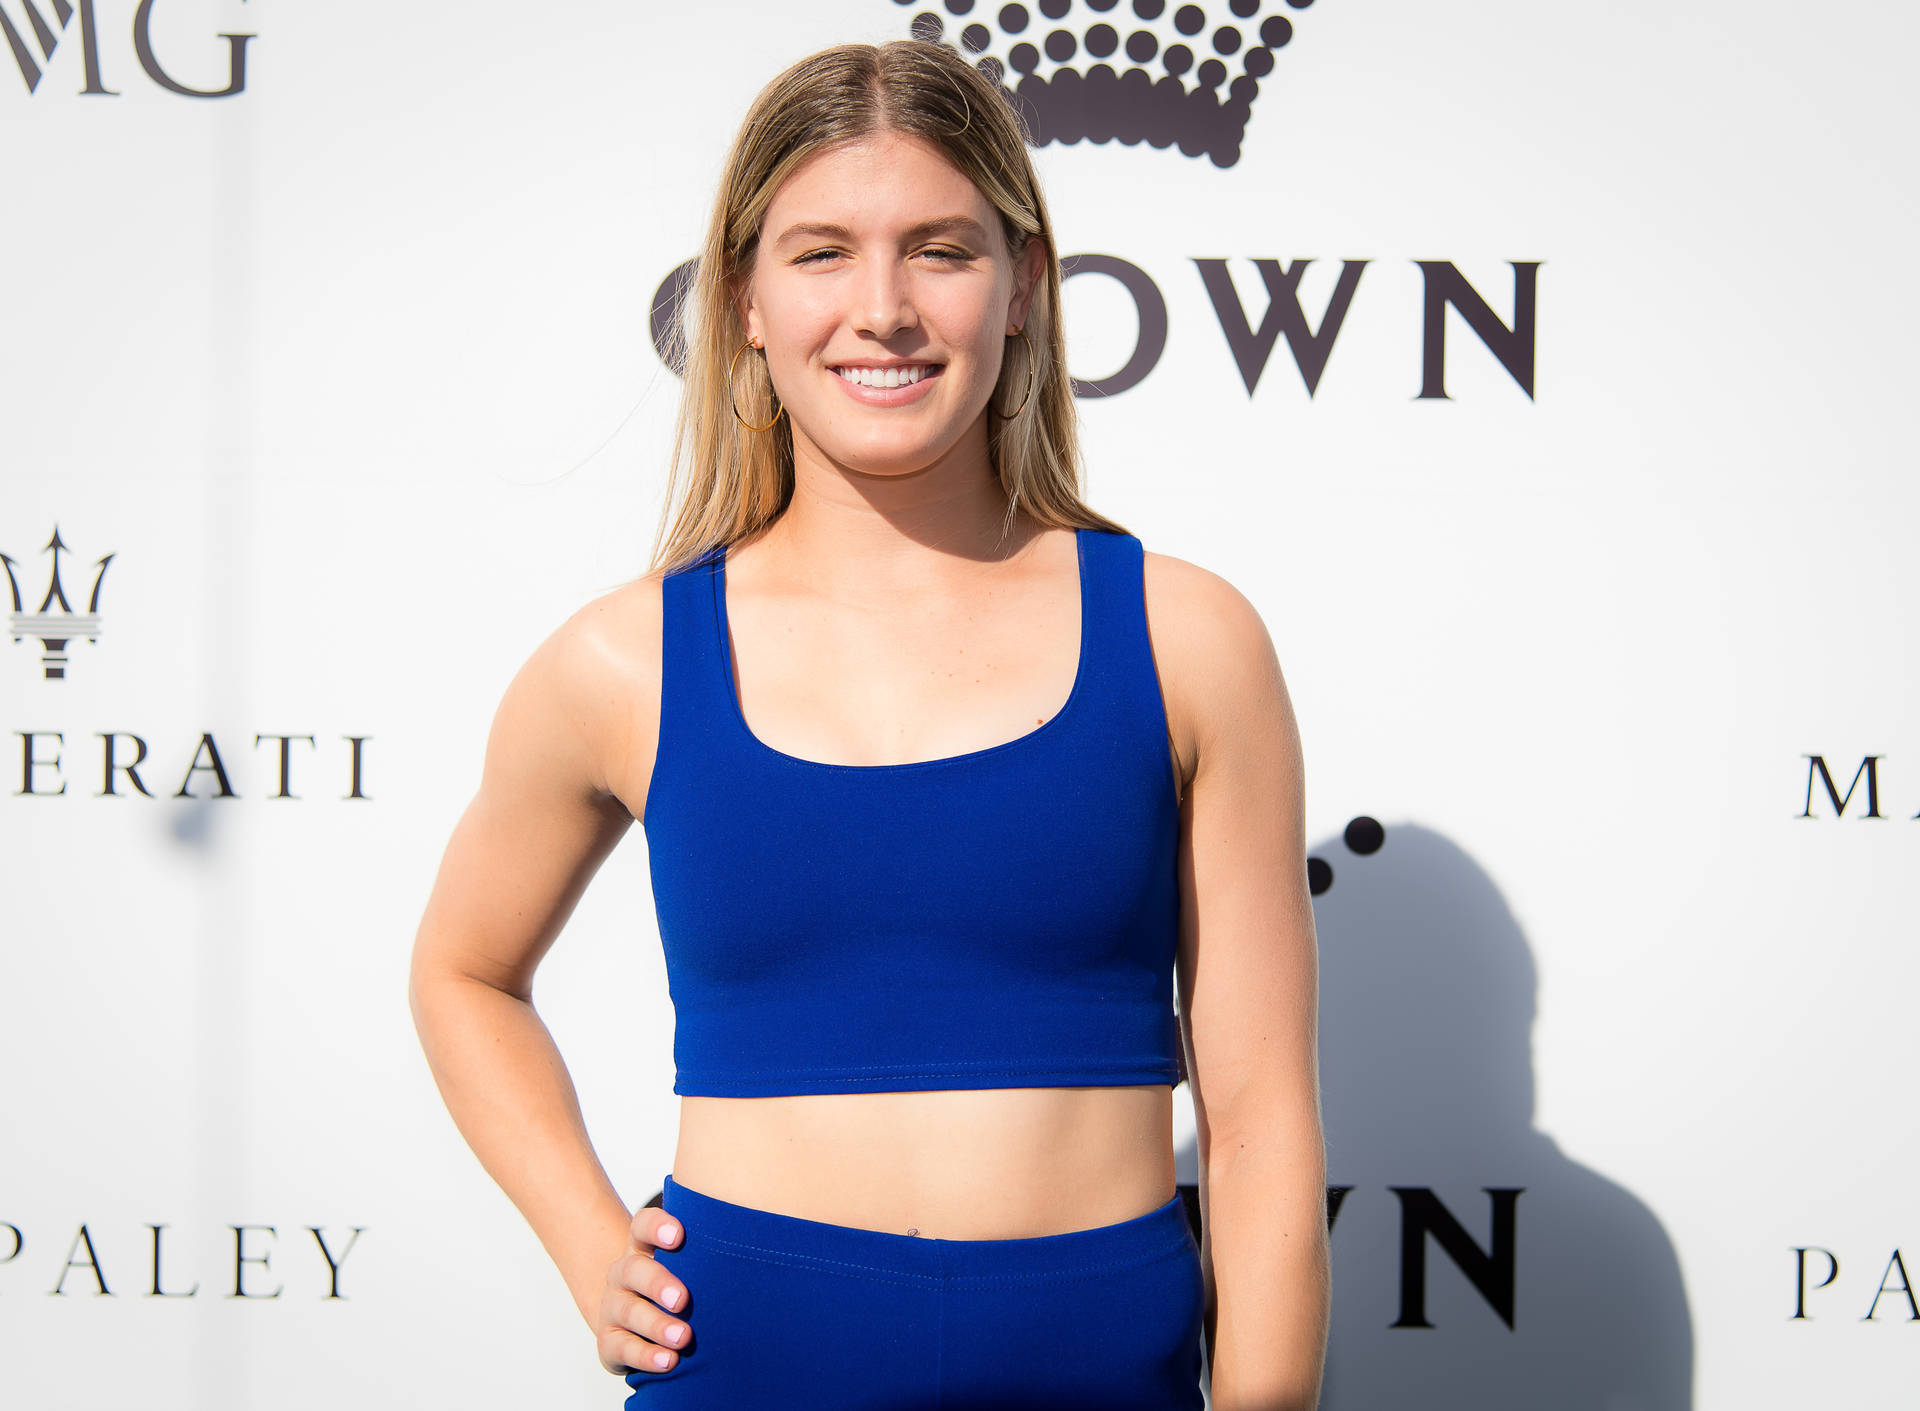 Canadian Tennis Star Eugenie Bouchard at a Public Event Wallpaper